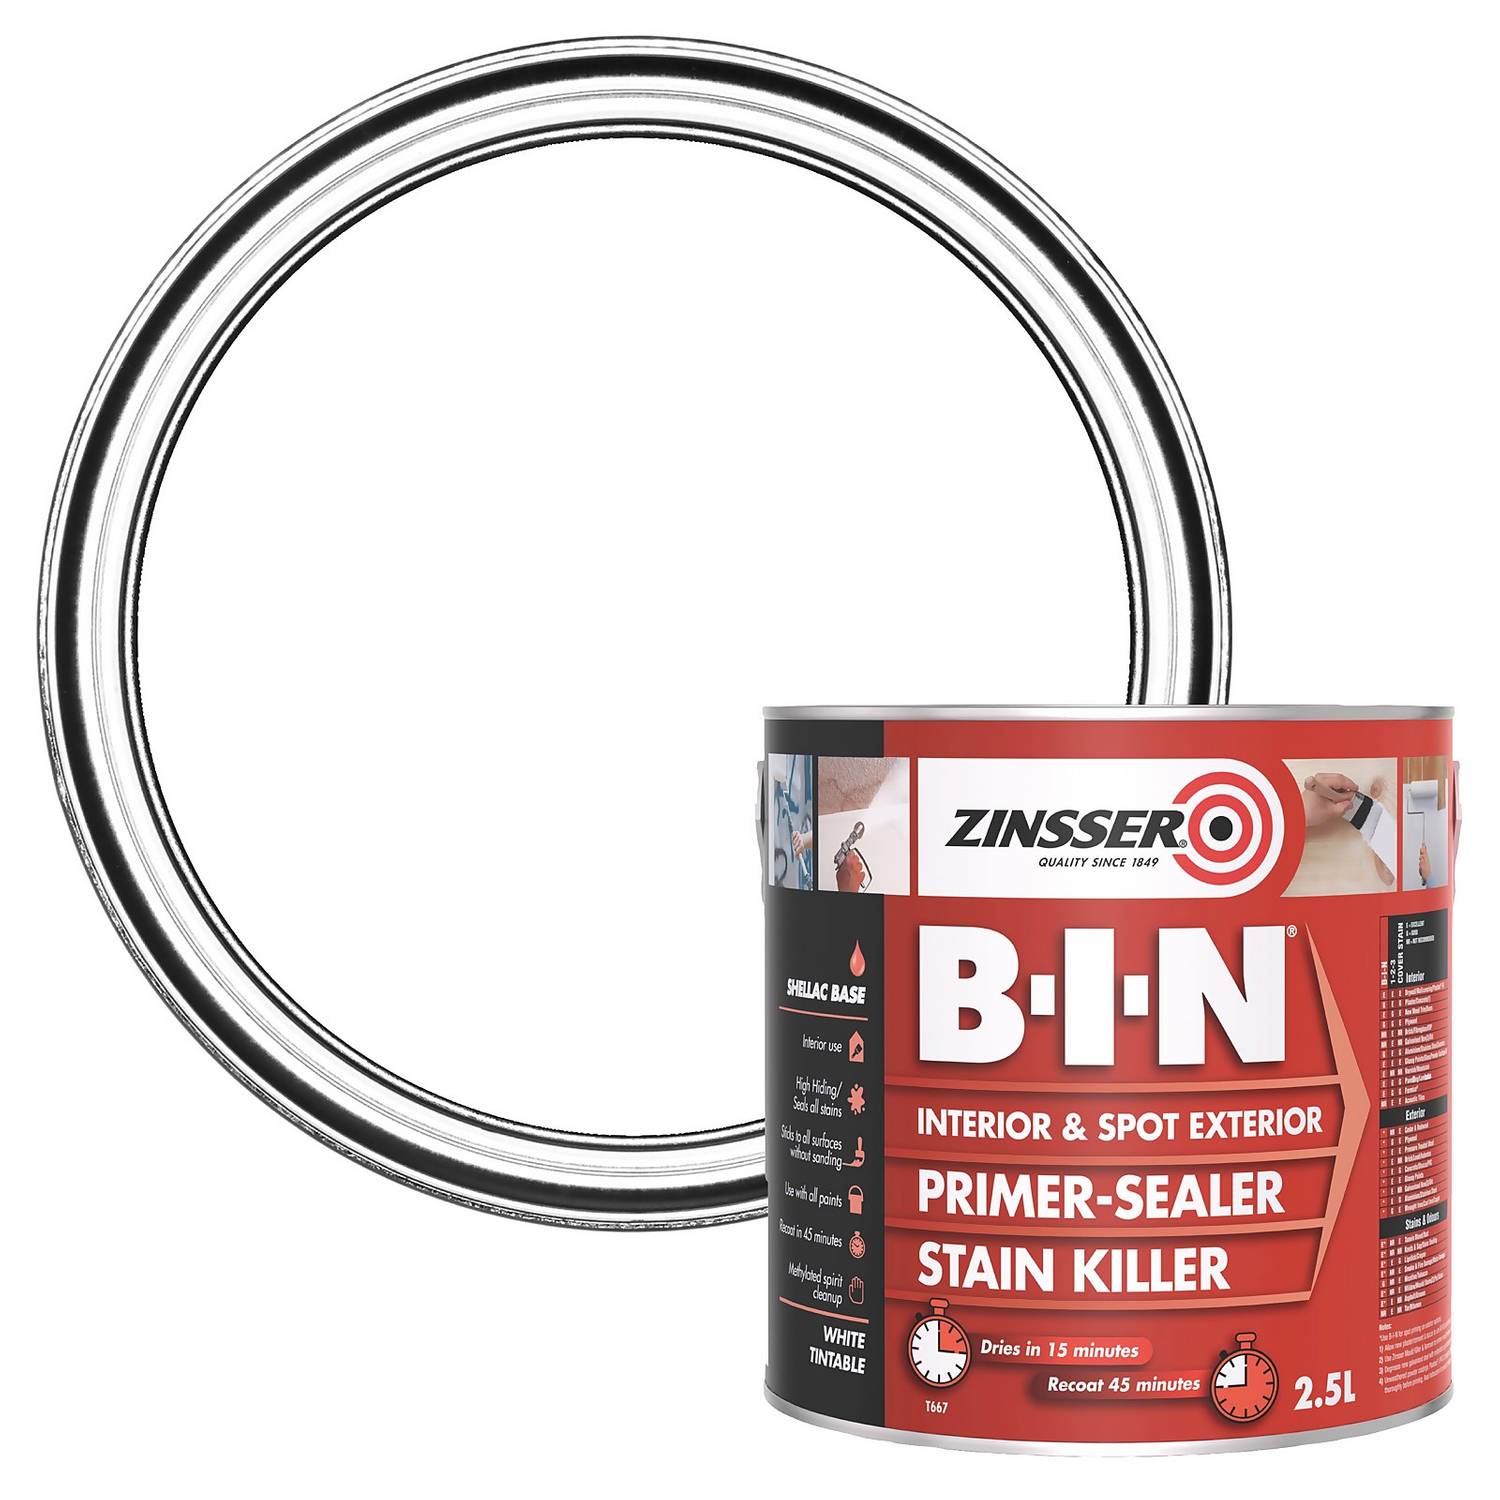 Paint & Decorating | Zinsser B-I-N Primer 500mL by Weirs of Baggot St